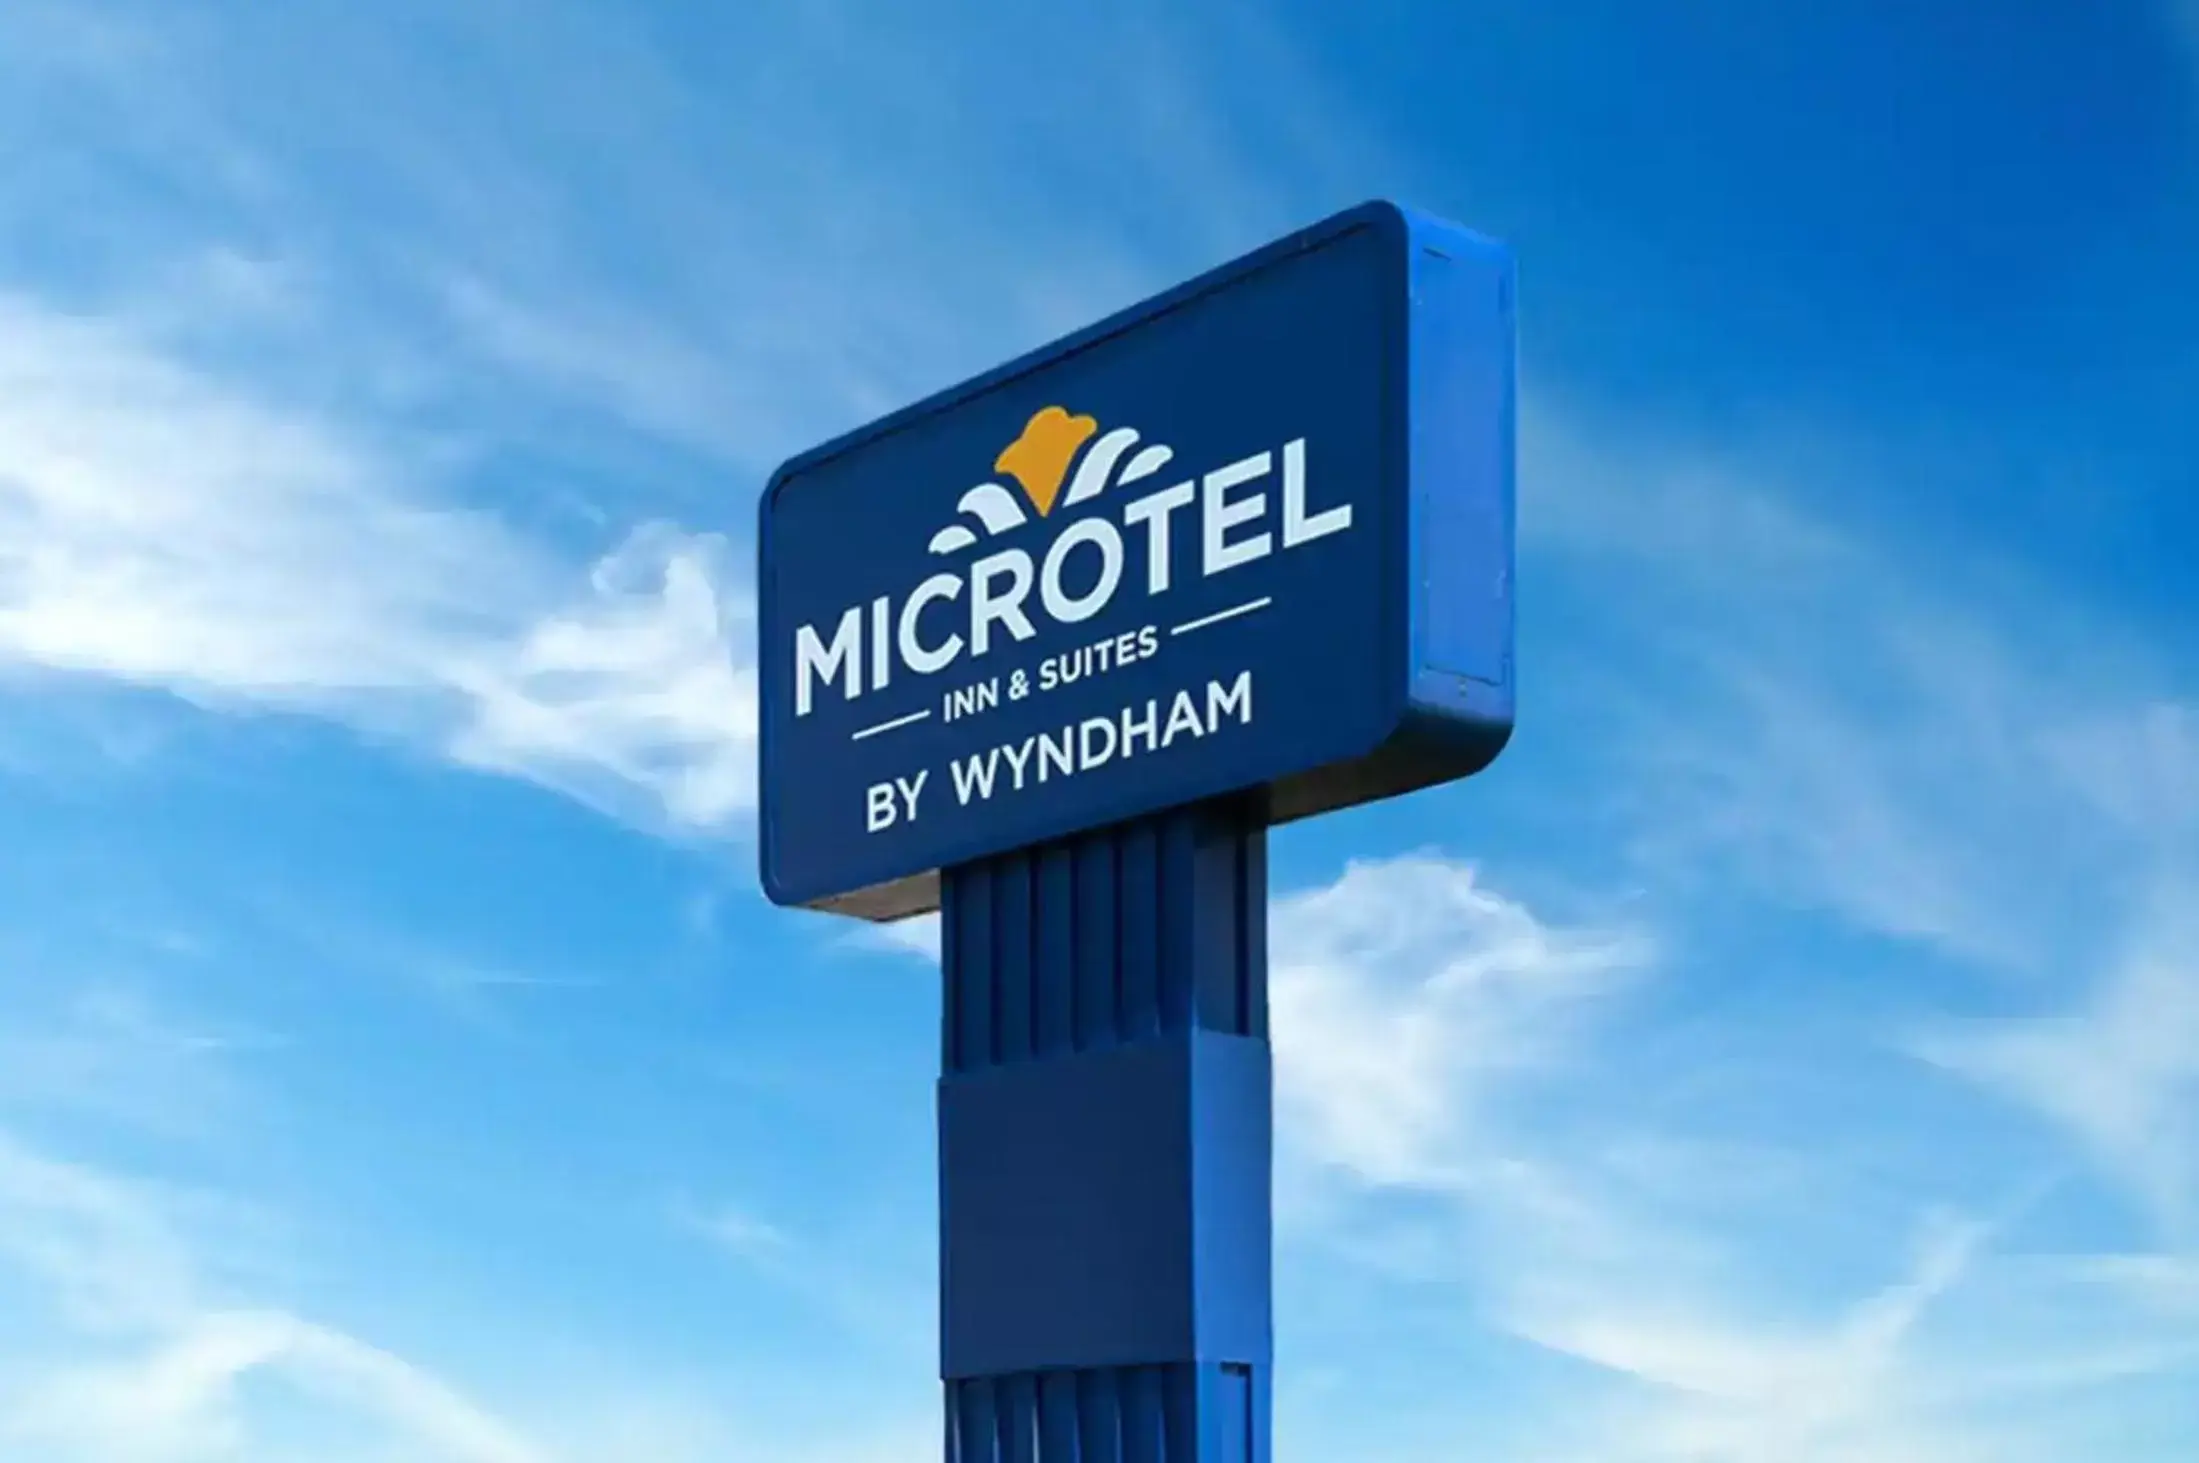 Facade/entrance in Microtel Inn & Suites by Wyndham Gambrills